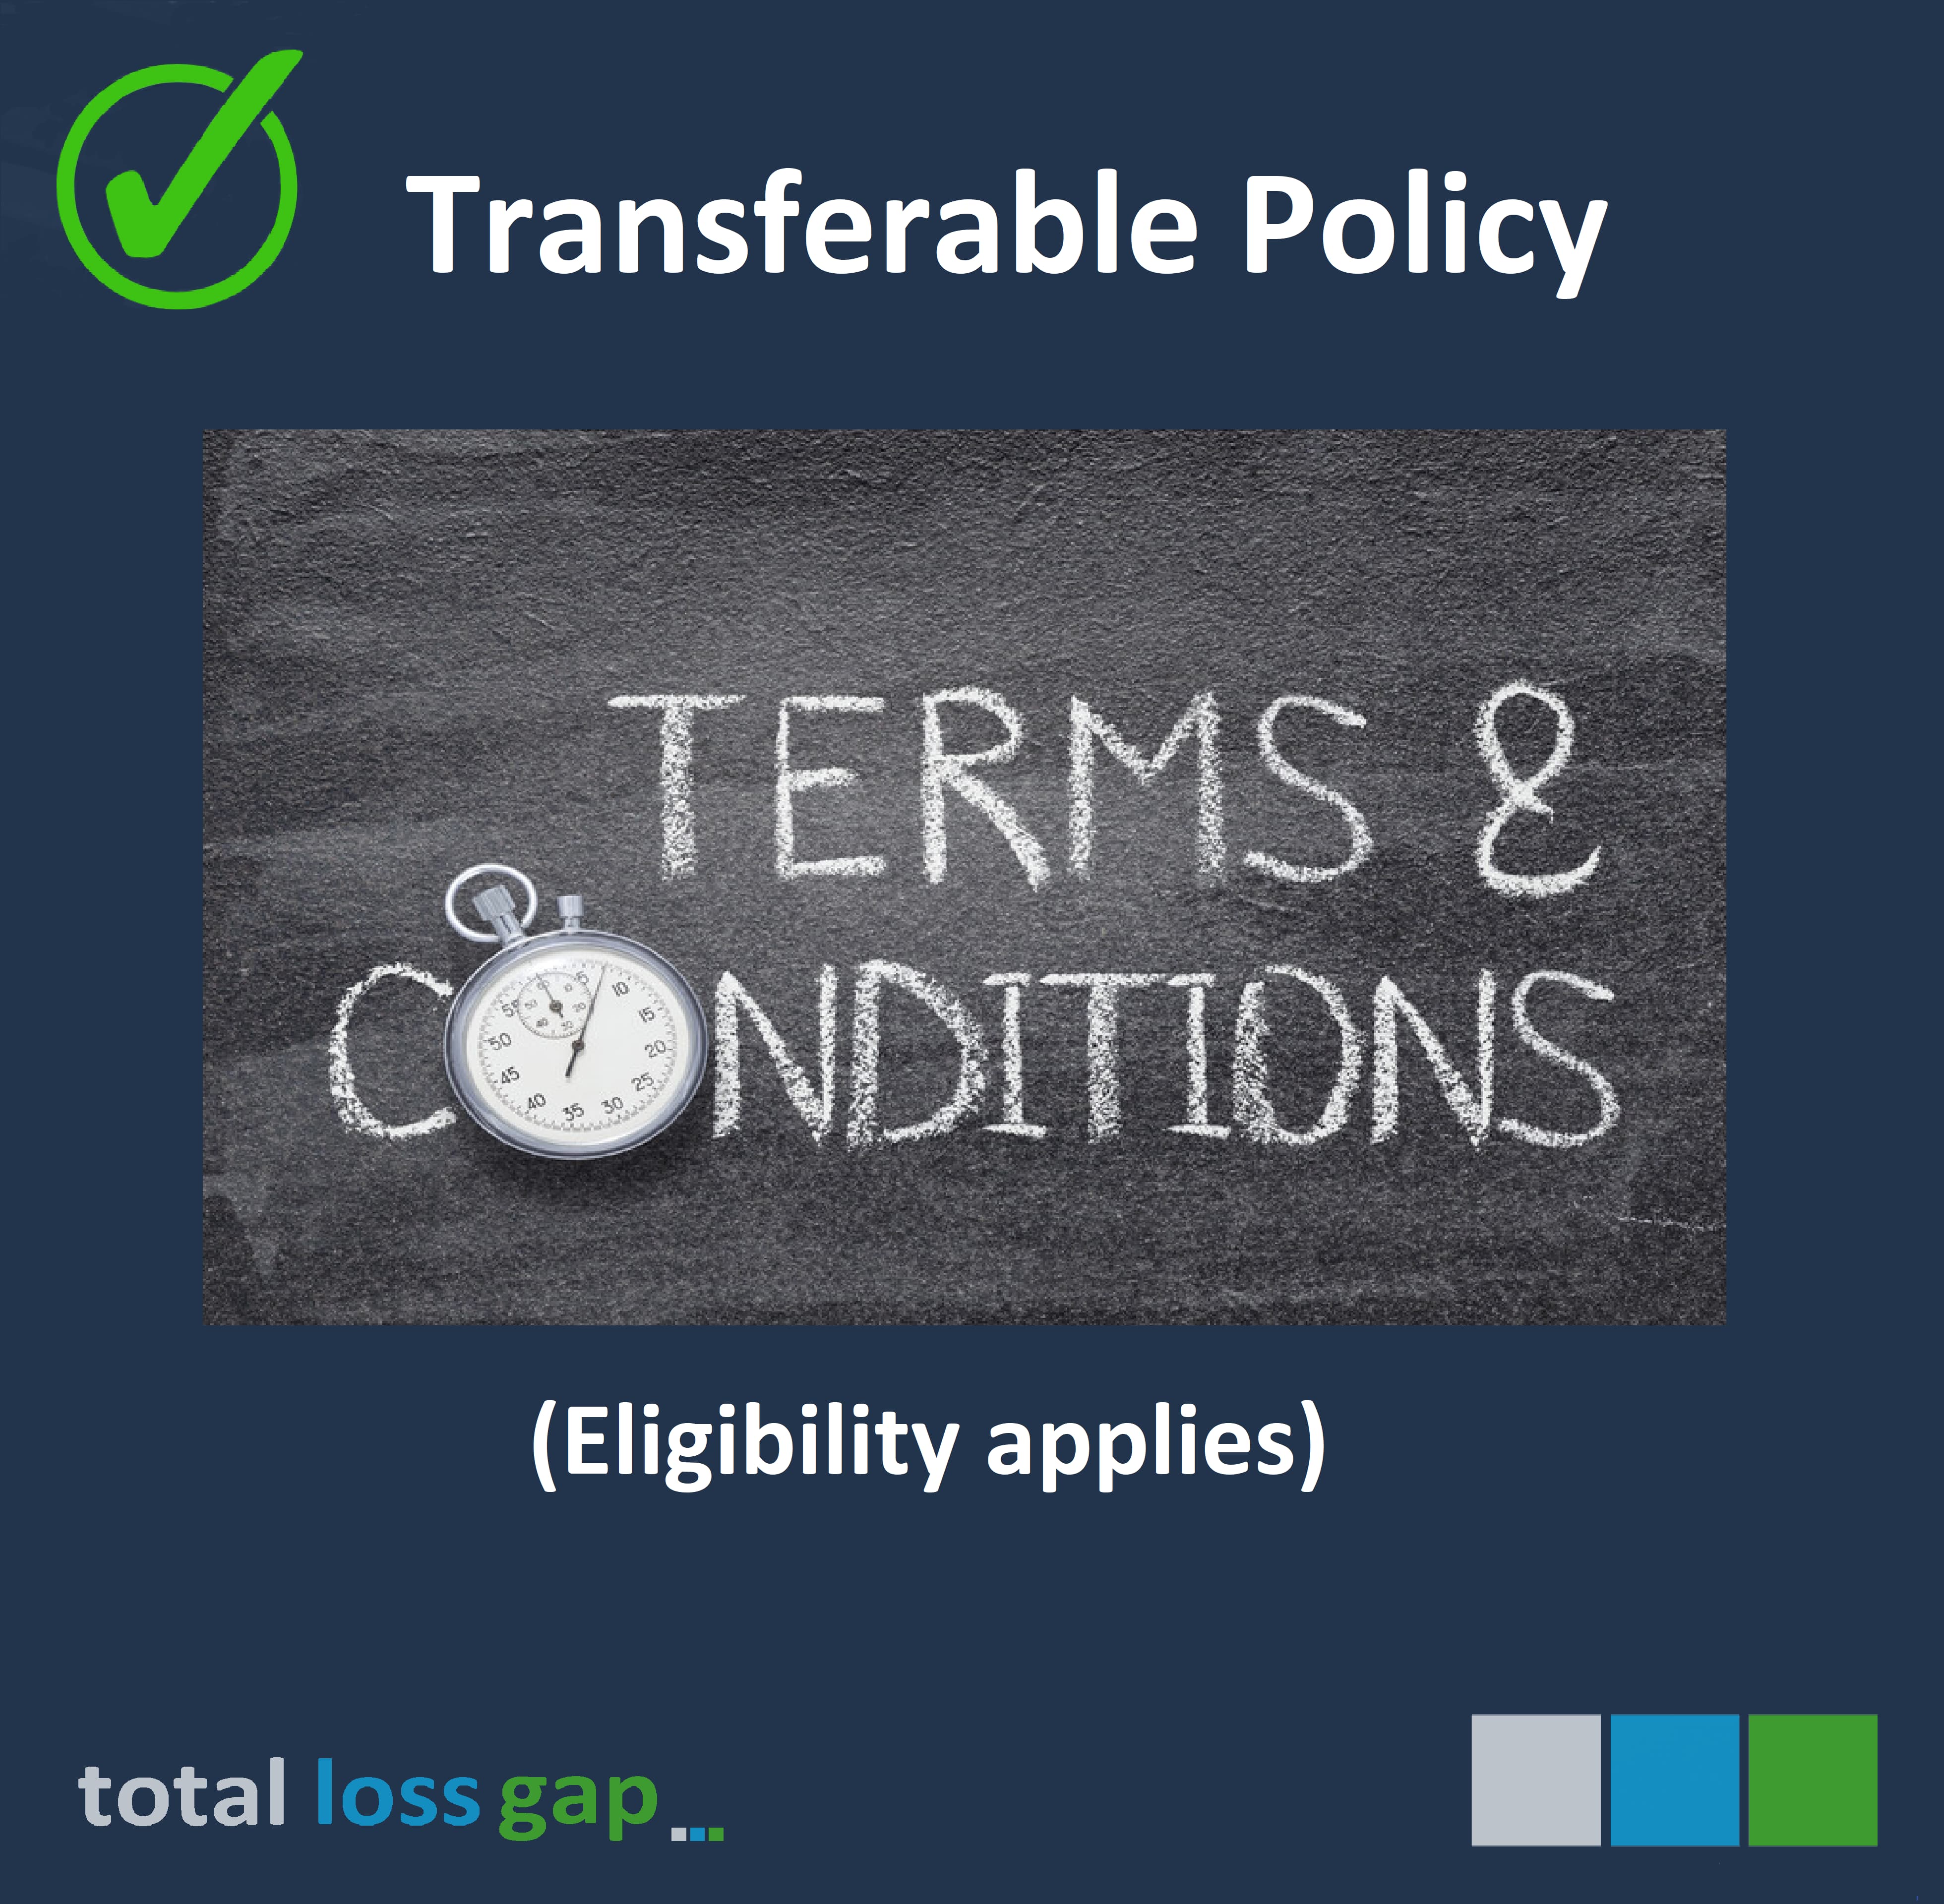 You can transfer your policy to your next eligible vehicle